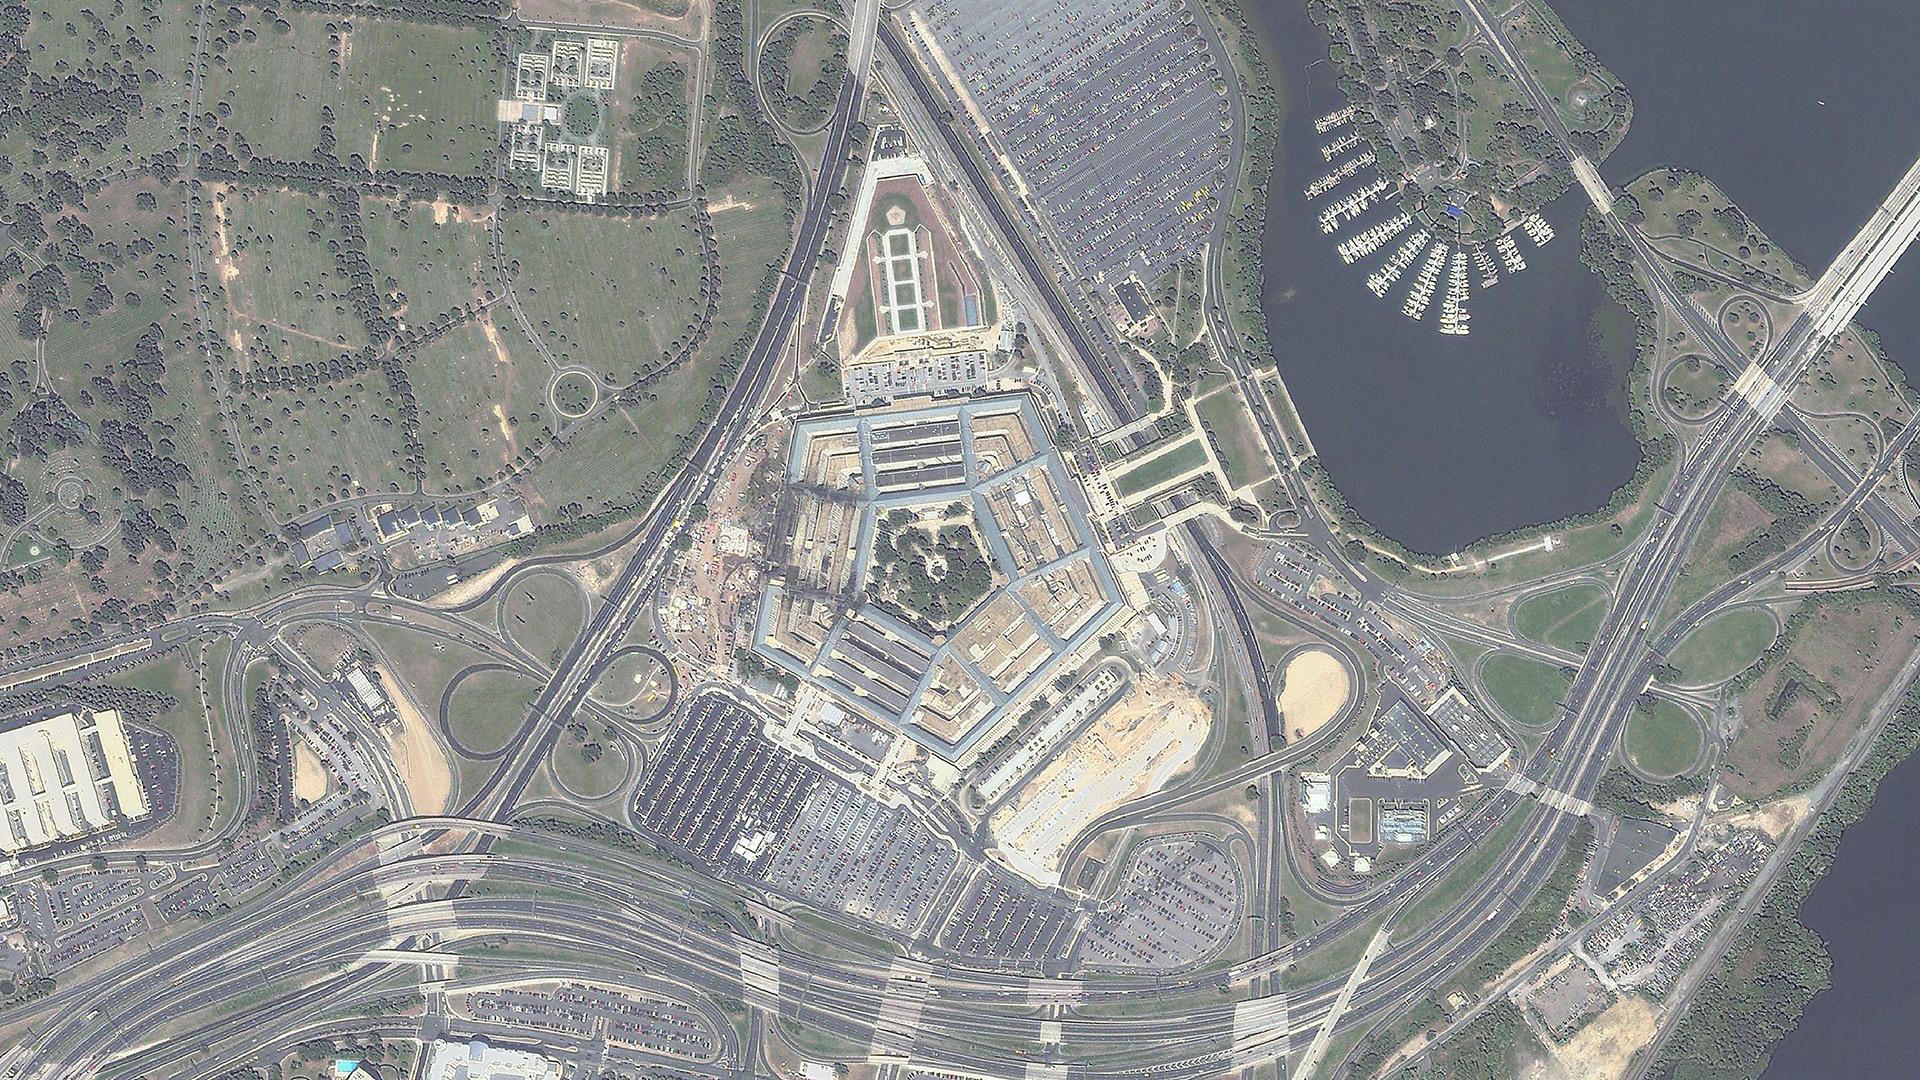 Aerial view of the Pentagon, post-attack.